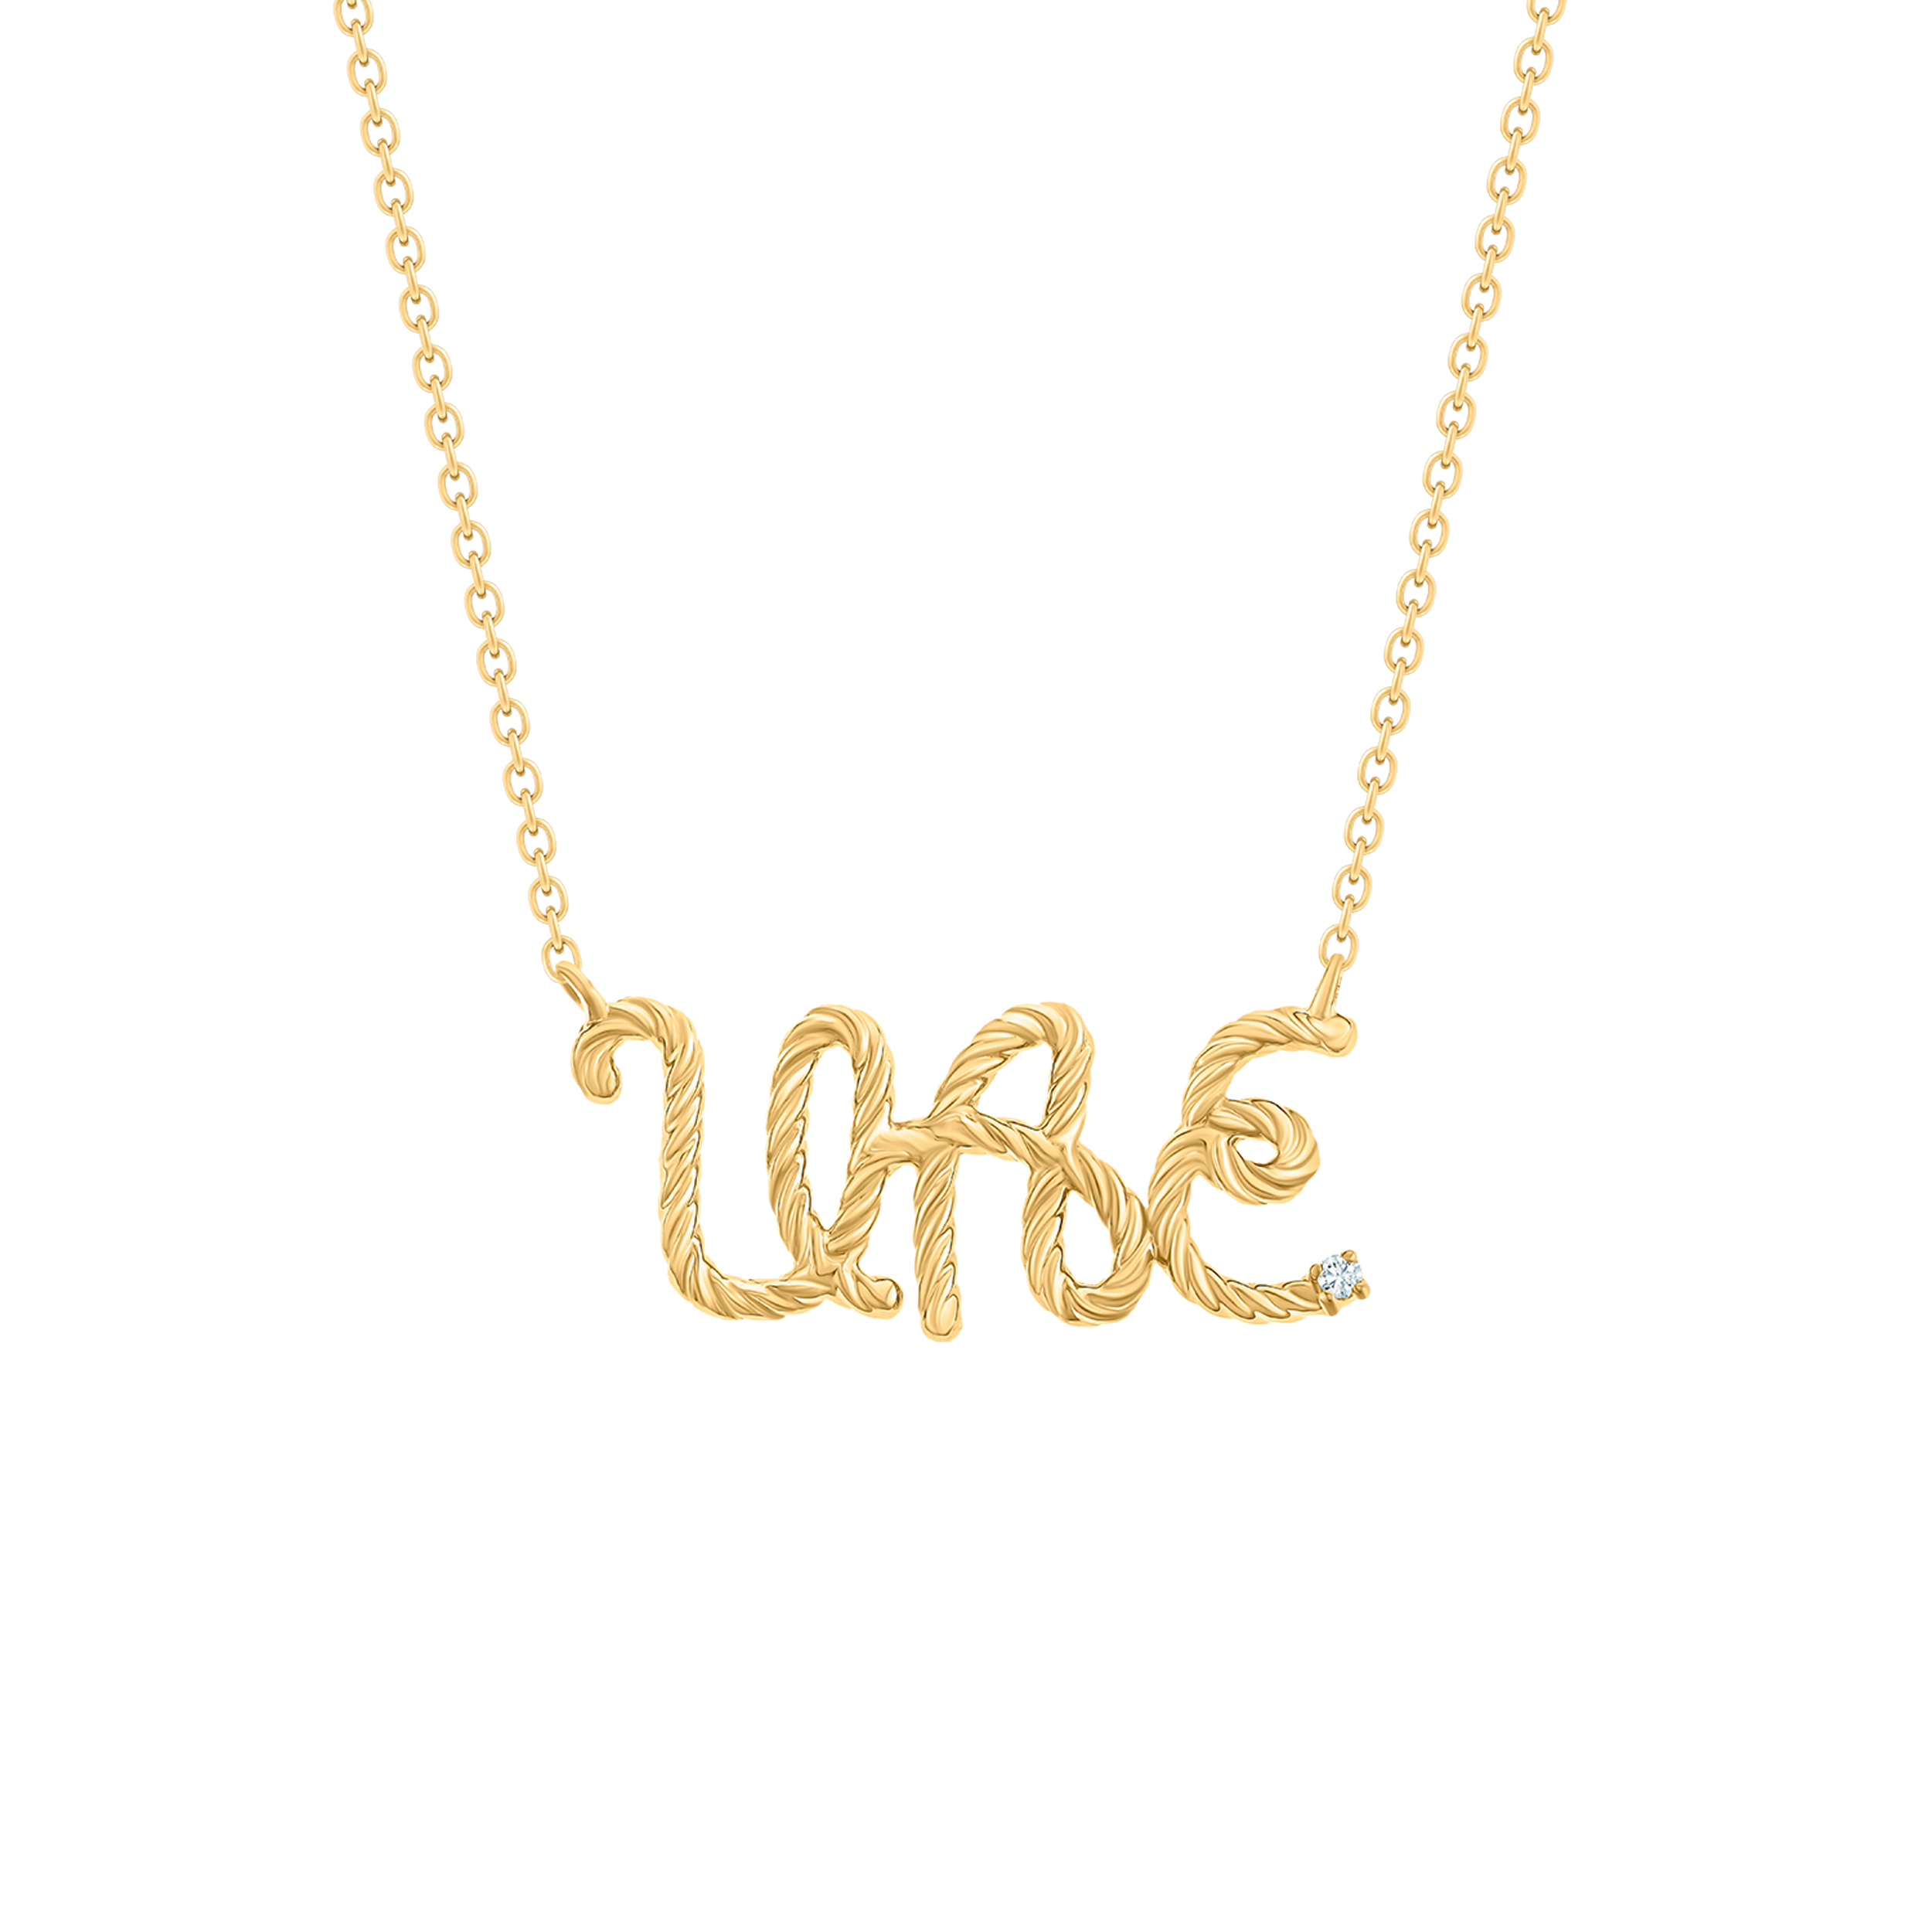 Promise to the UAE Kids Necklace